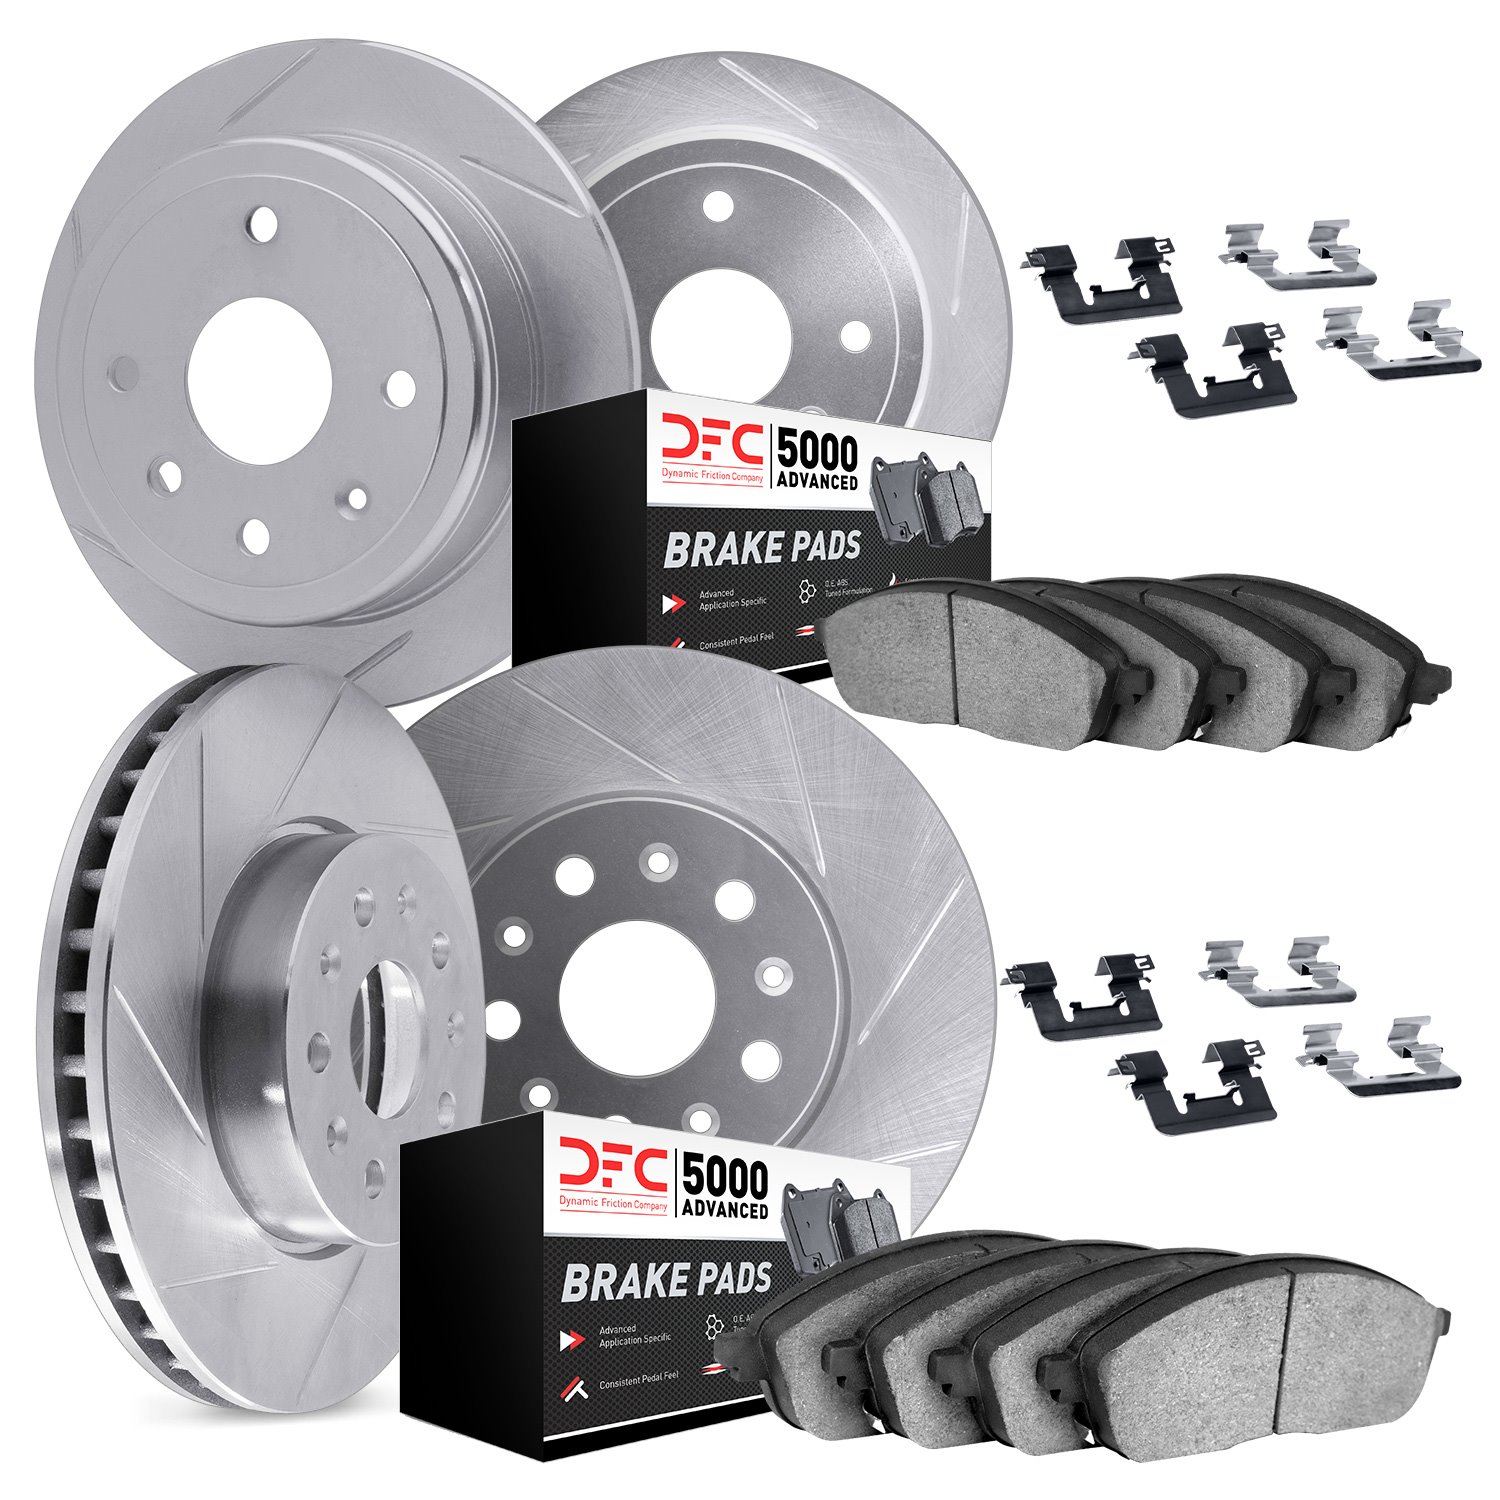 5514-63105 Slotted Brake Rotors w/5000 Advanced Brake Pads Kit & Hardware [Silver], 2006-2012 Mercedes-Benz, Position: Front and